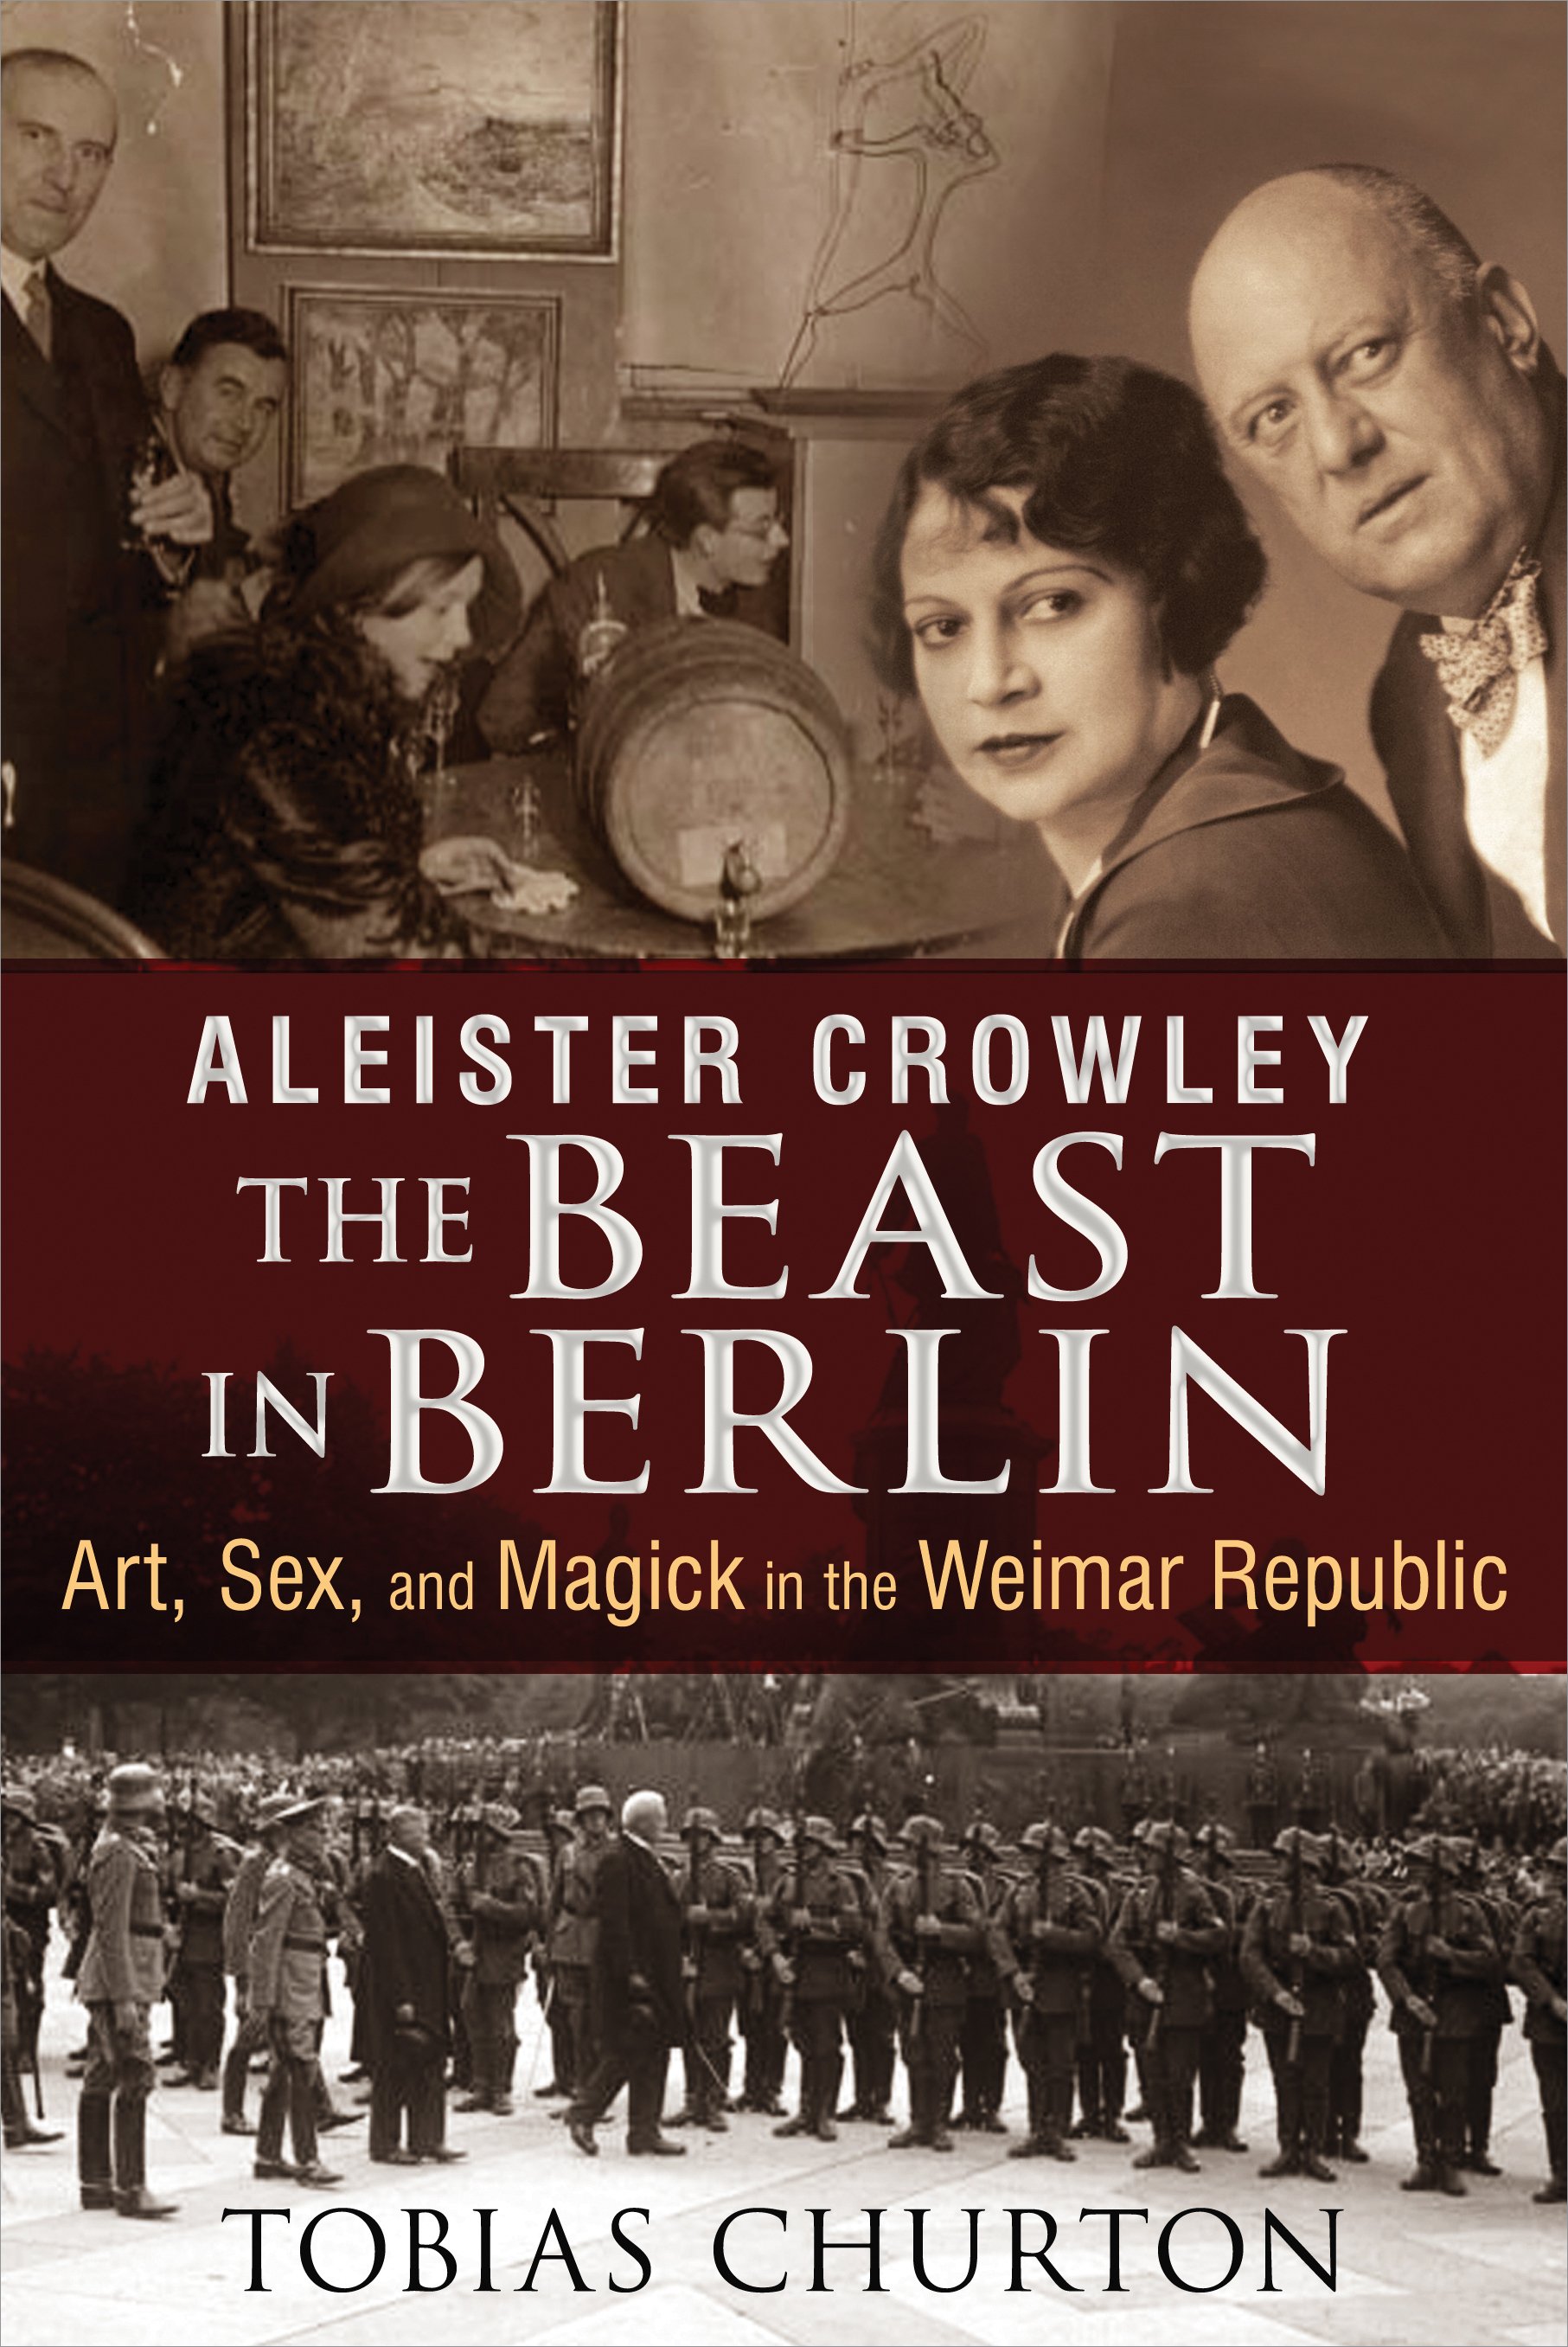 Aleister Crowley: The Beast in Berlin by Tobias Churton